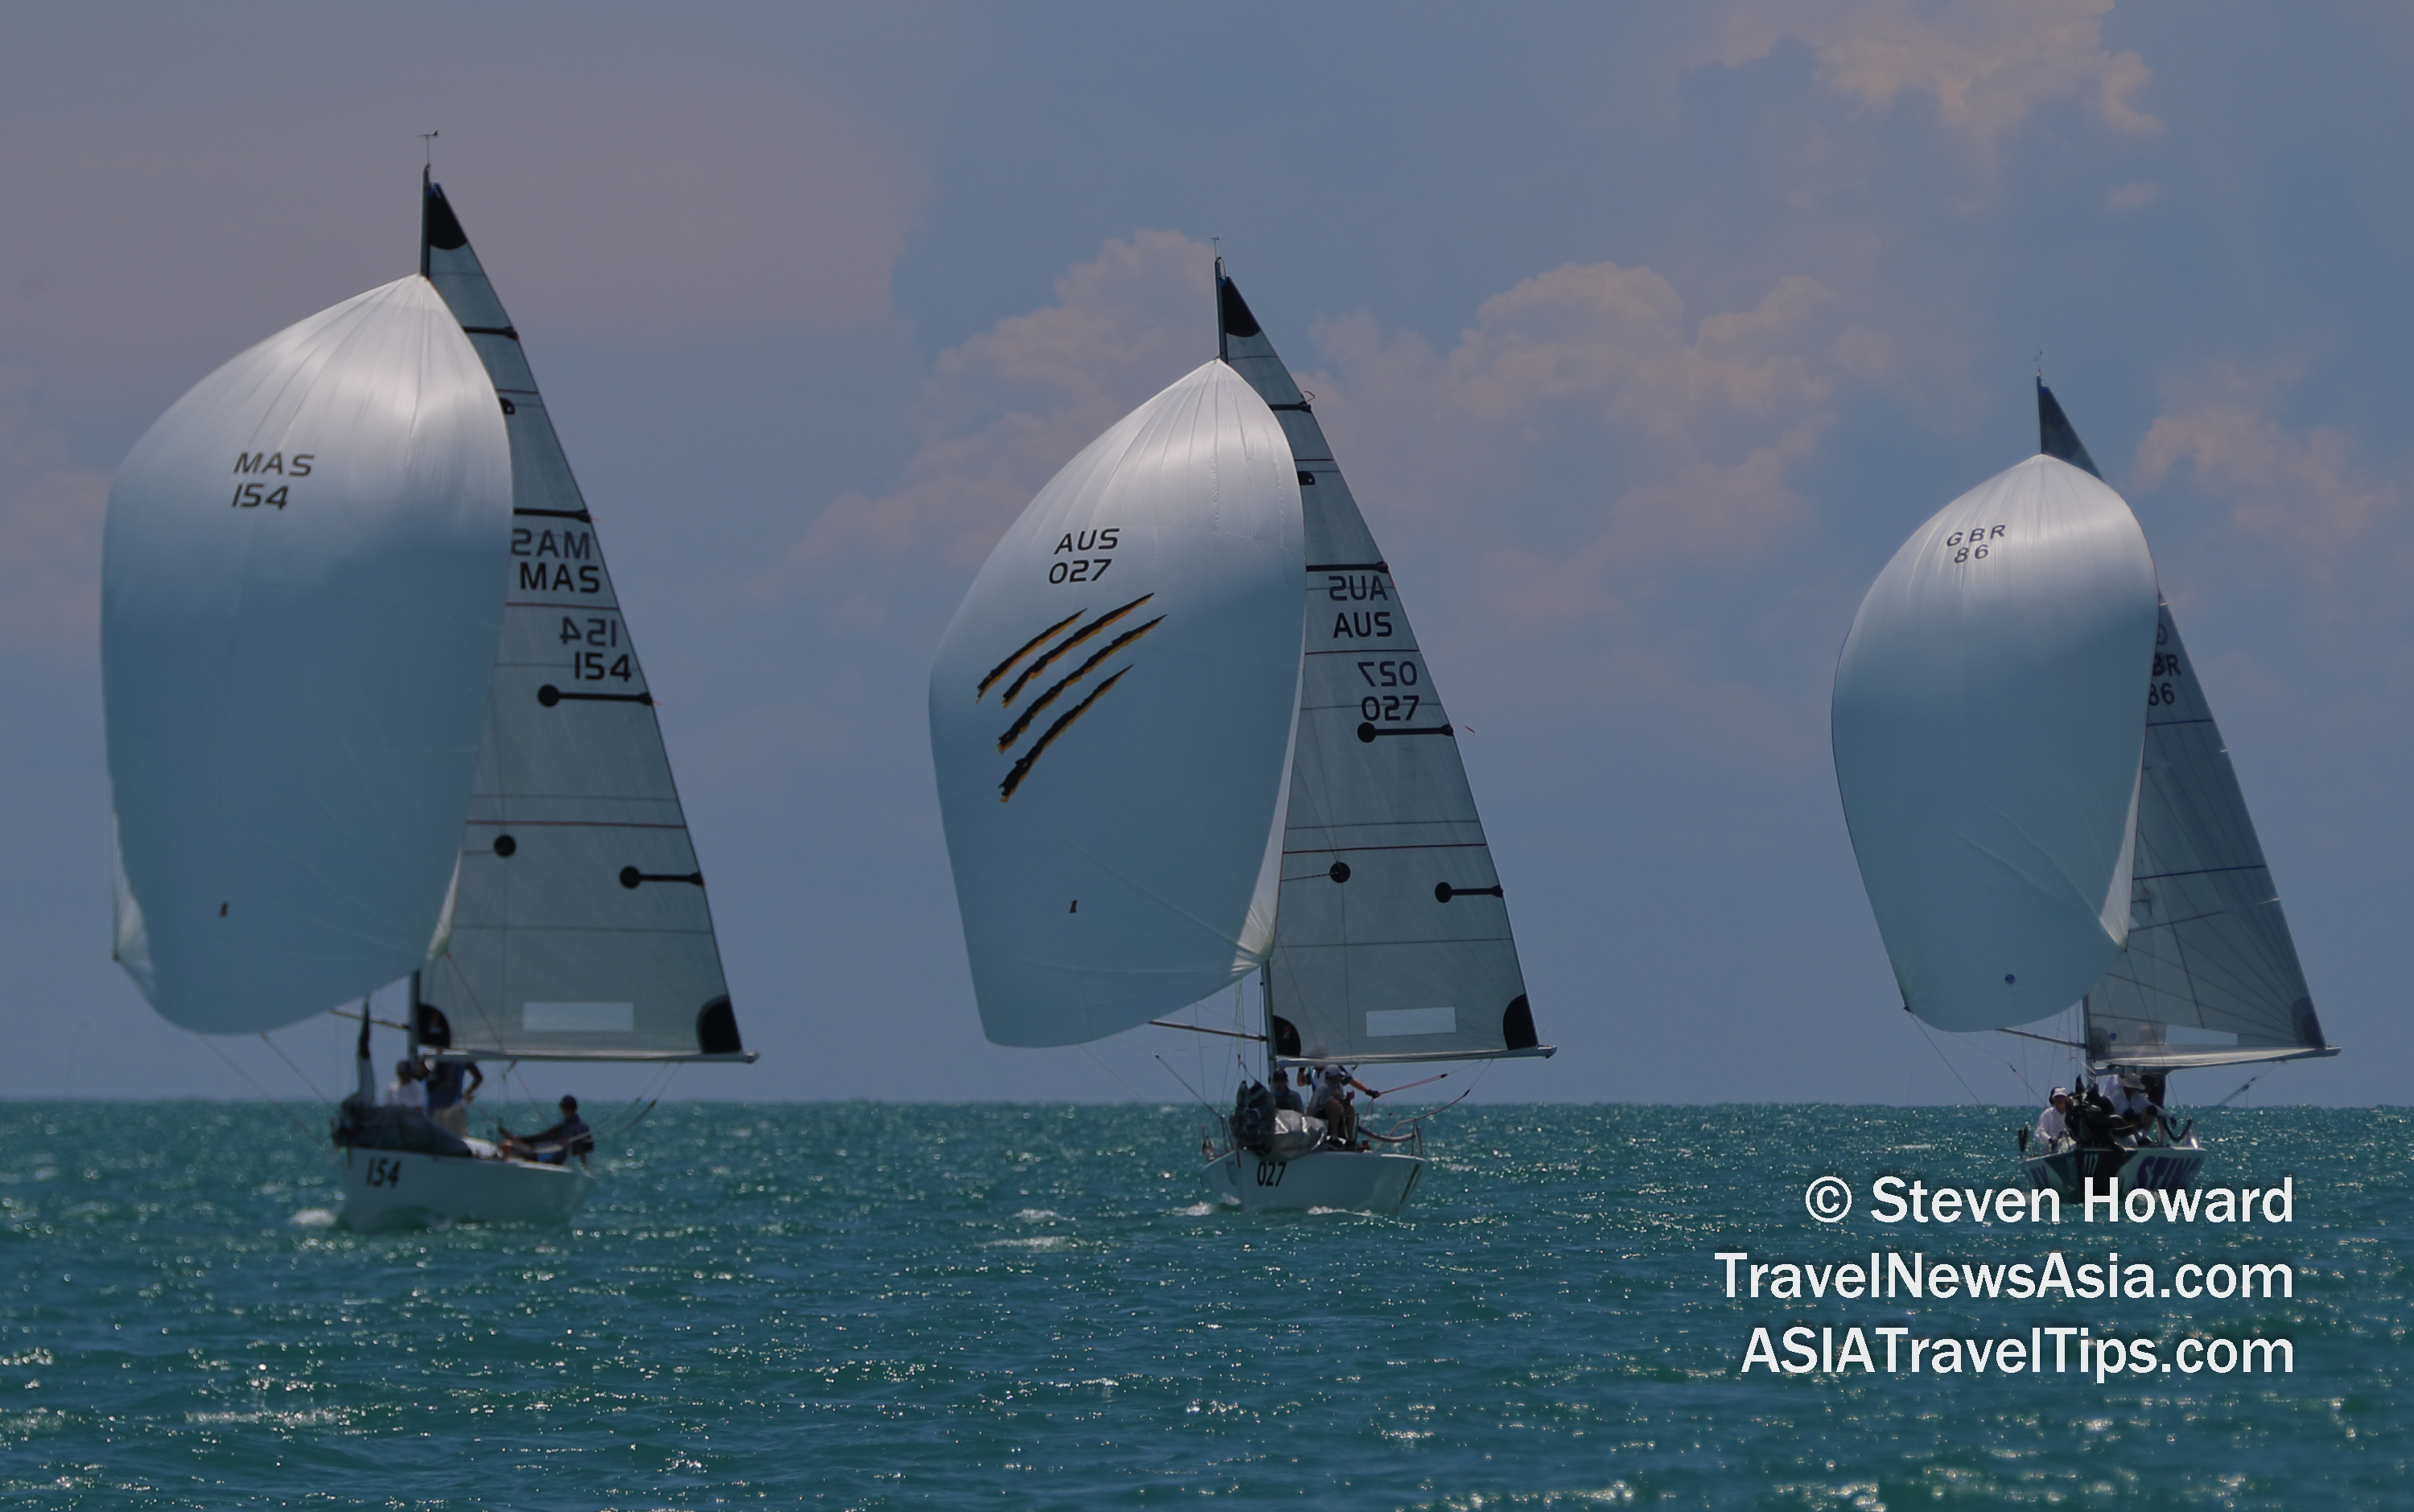 Racing in the Top of the Gulf Regatta 2019 in Pattaya, Thailand. Picture by Steven Howard of TravelNewsAsia.com Click to enlarge.